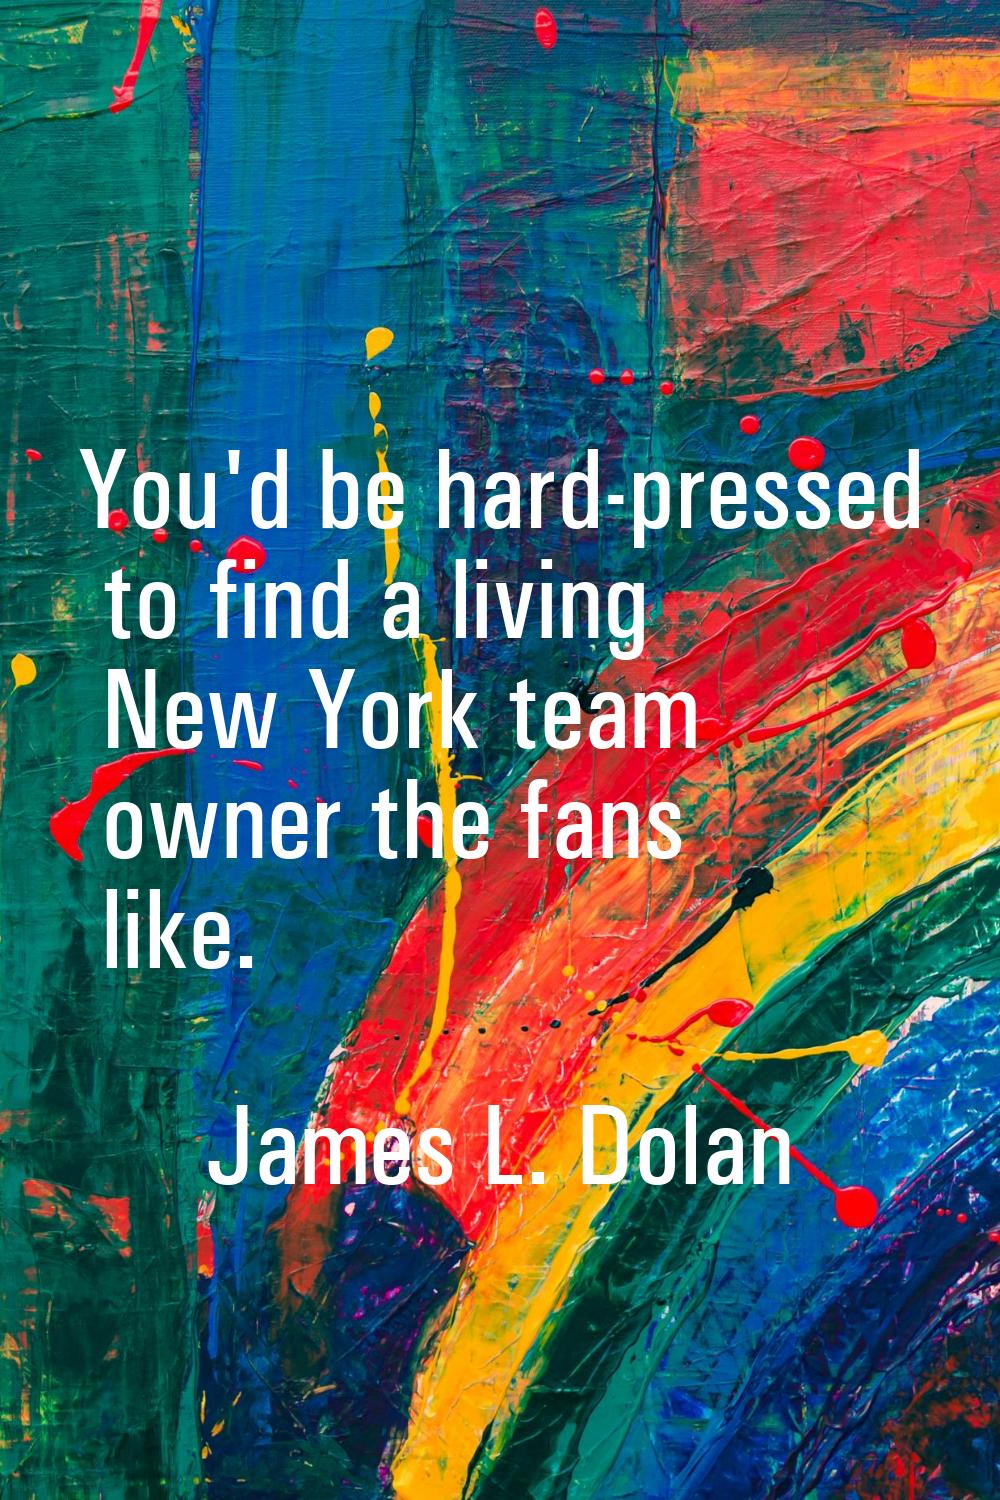 You'd be hard-pressed to find a living New York team owner the fans like.